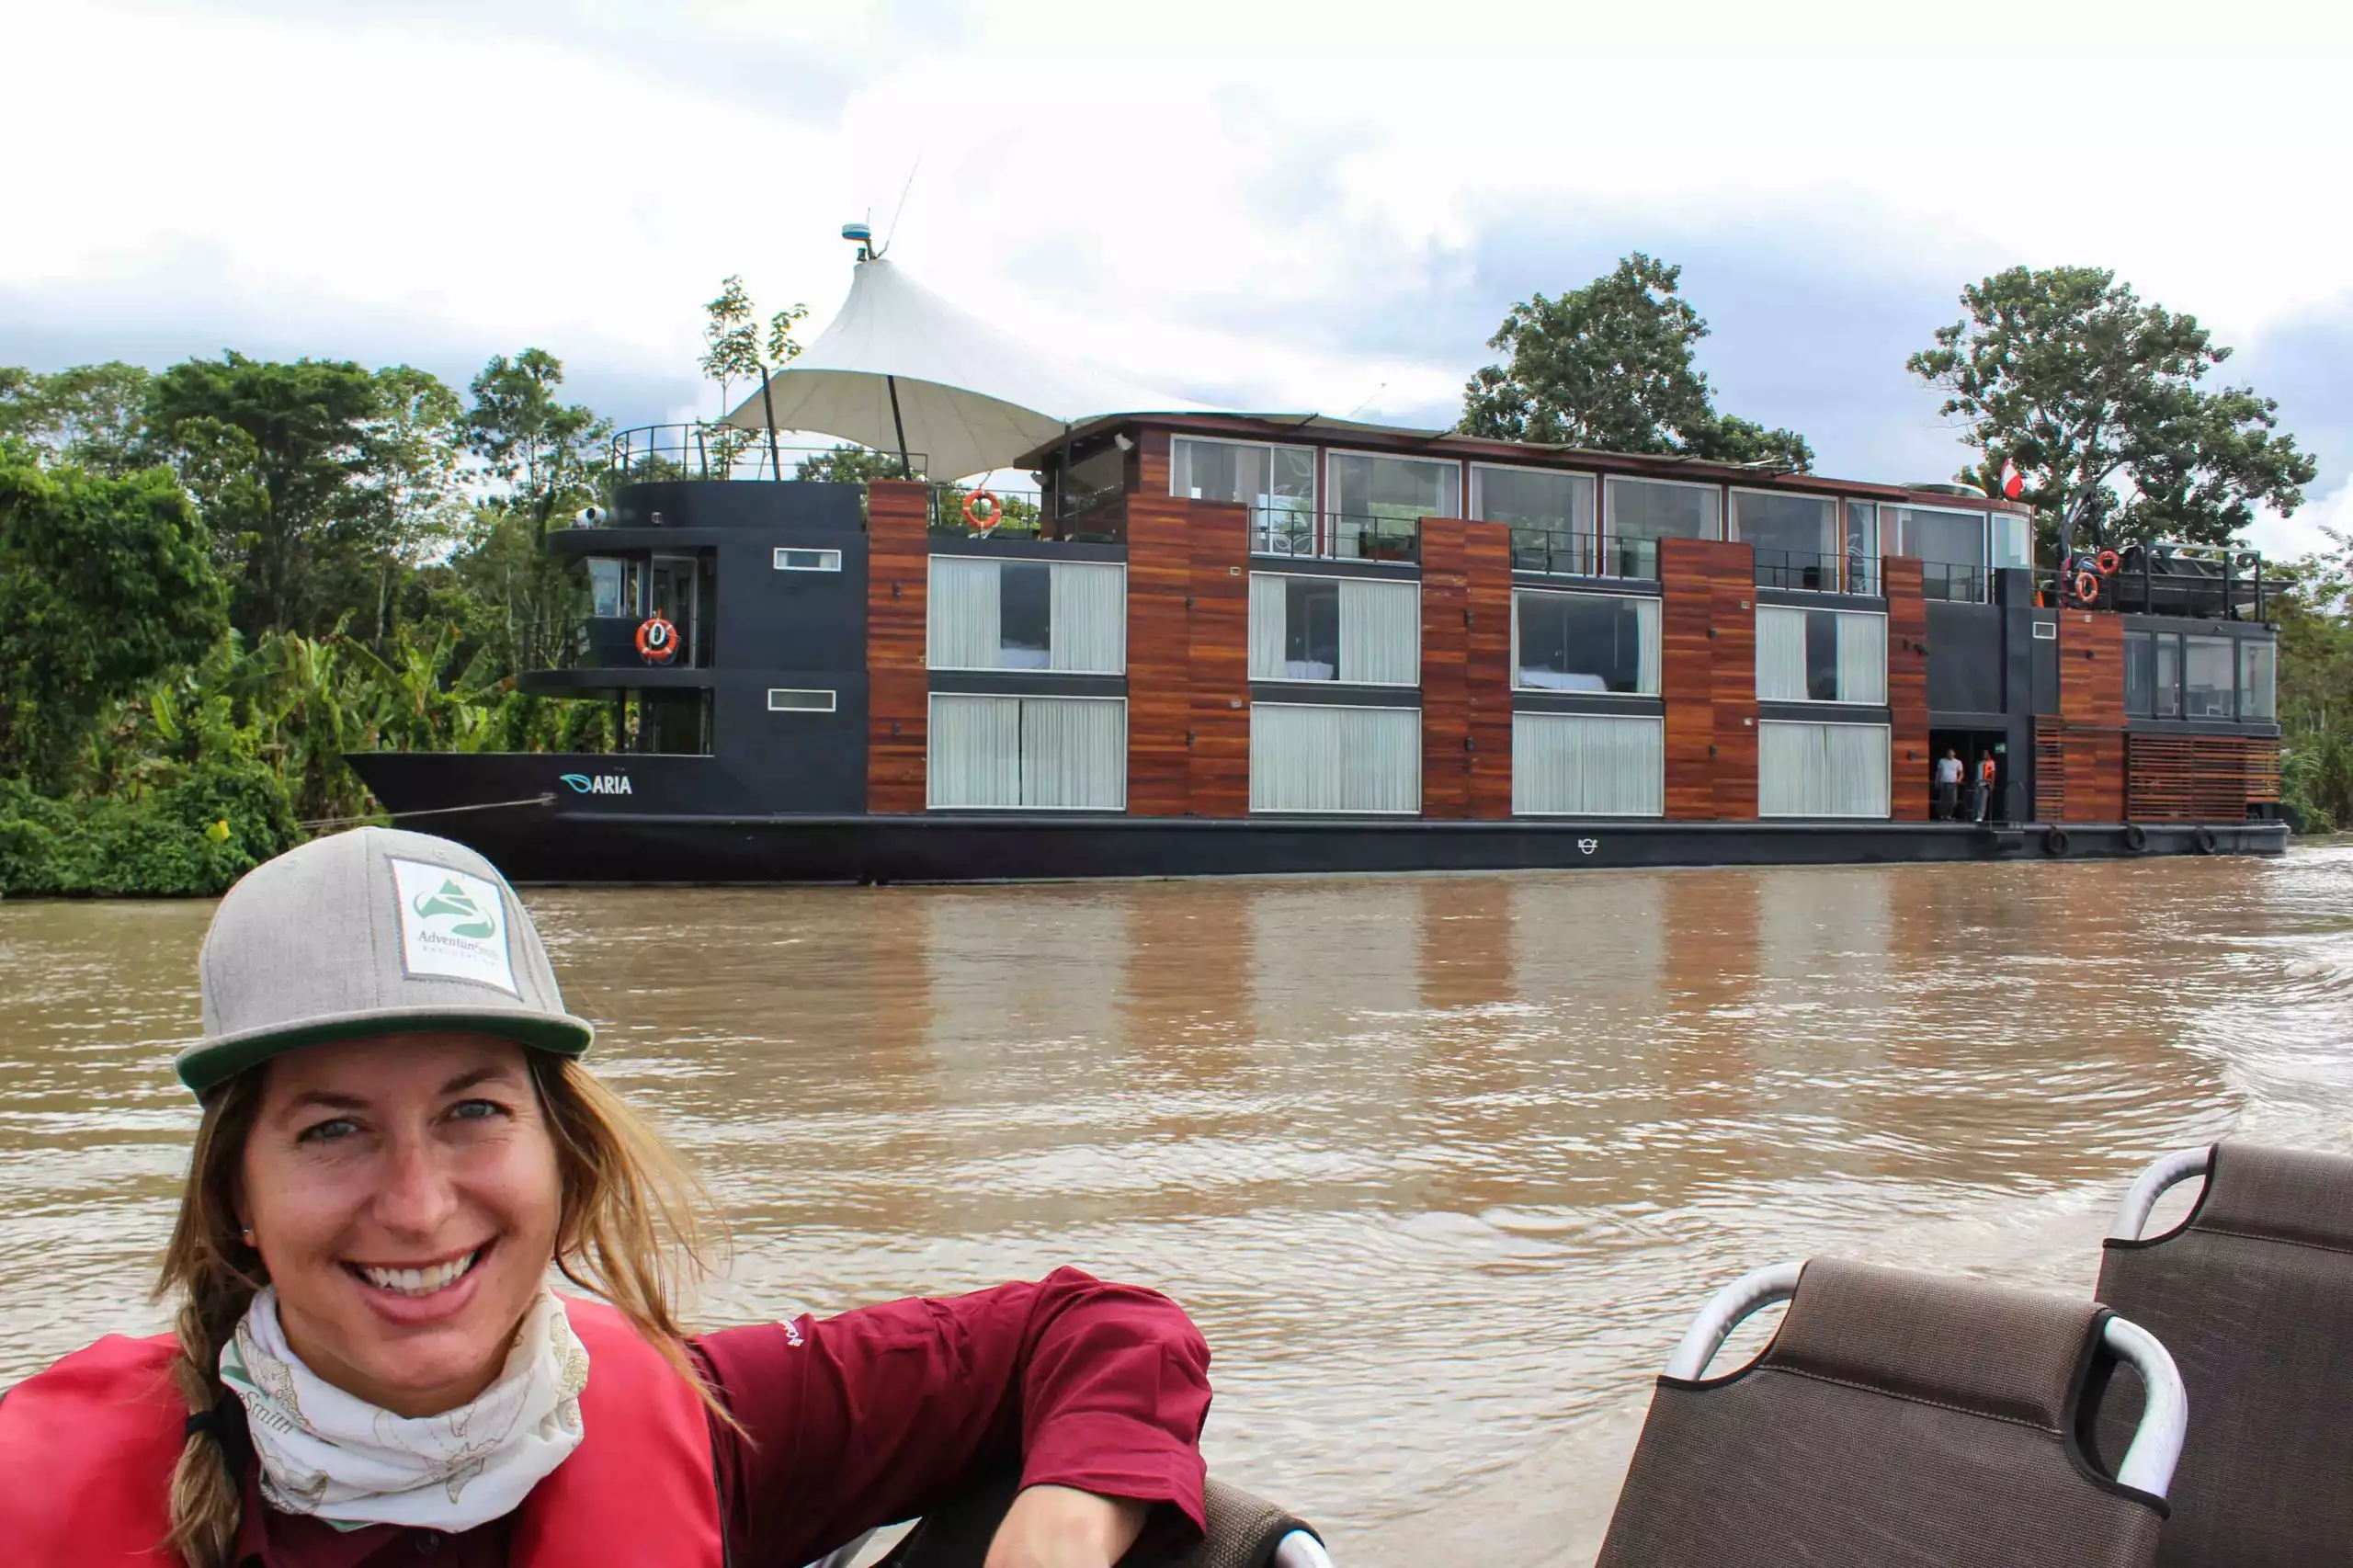 Women in adventure gear, posing in front of a small river cruise in the amazon